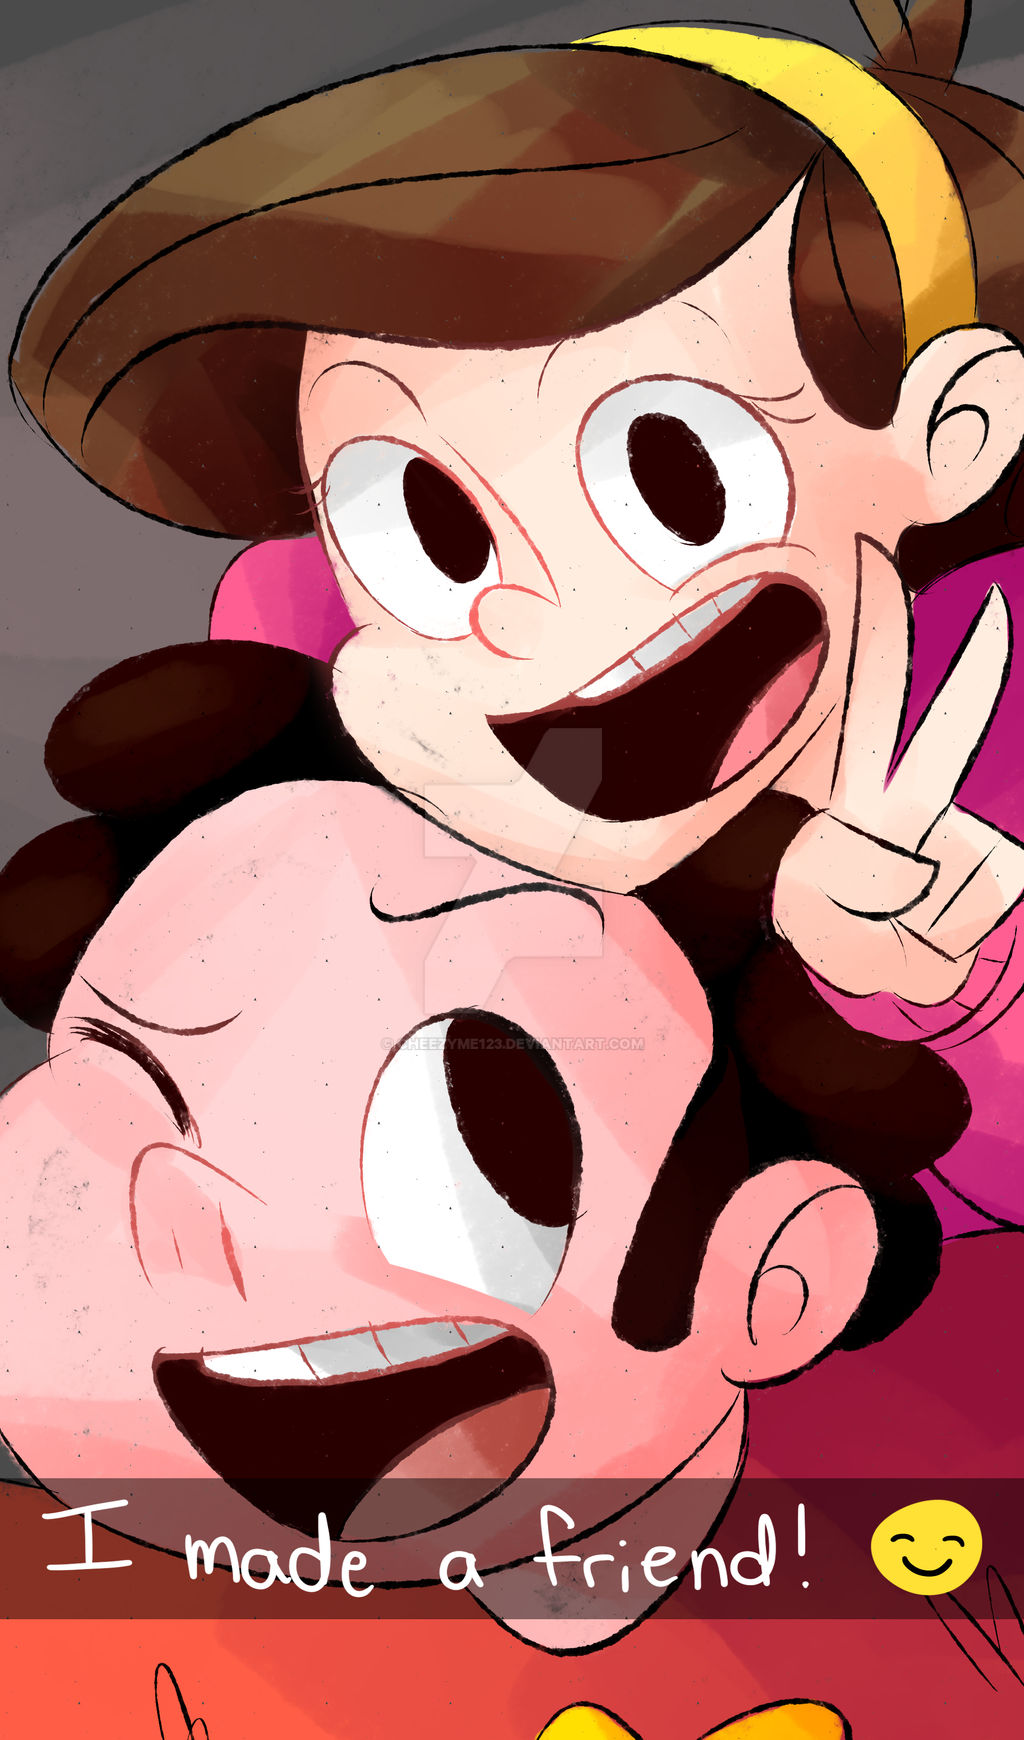 Steven and Mabel